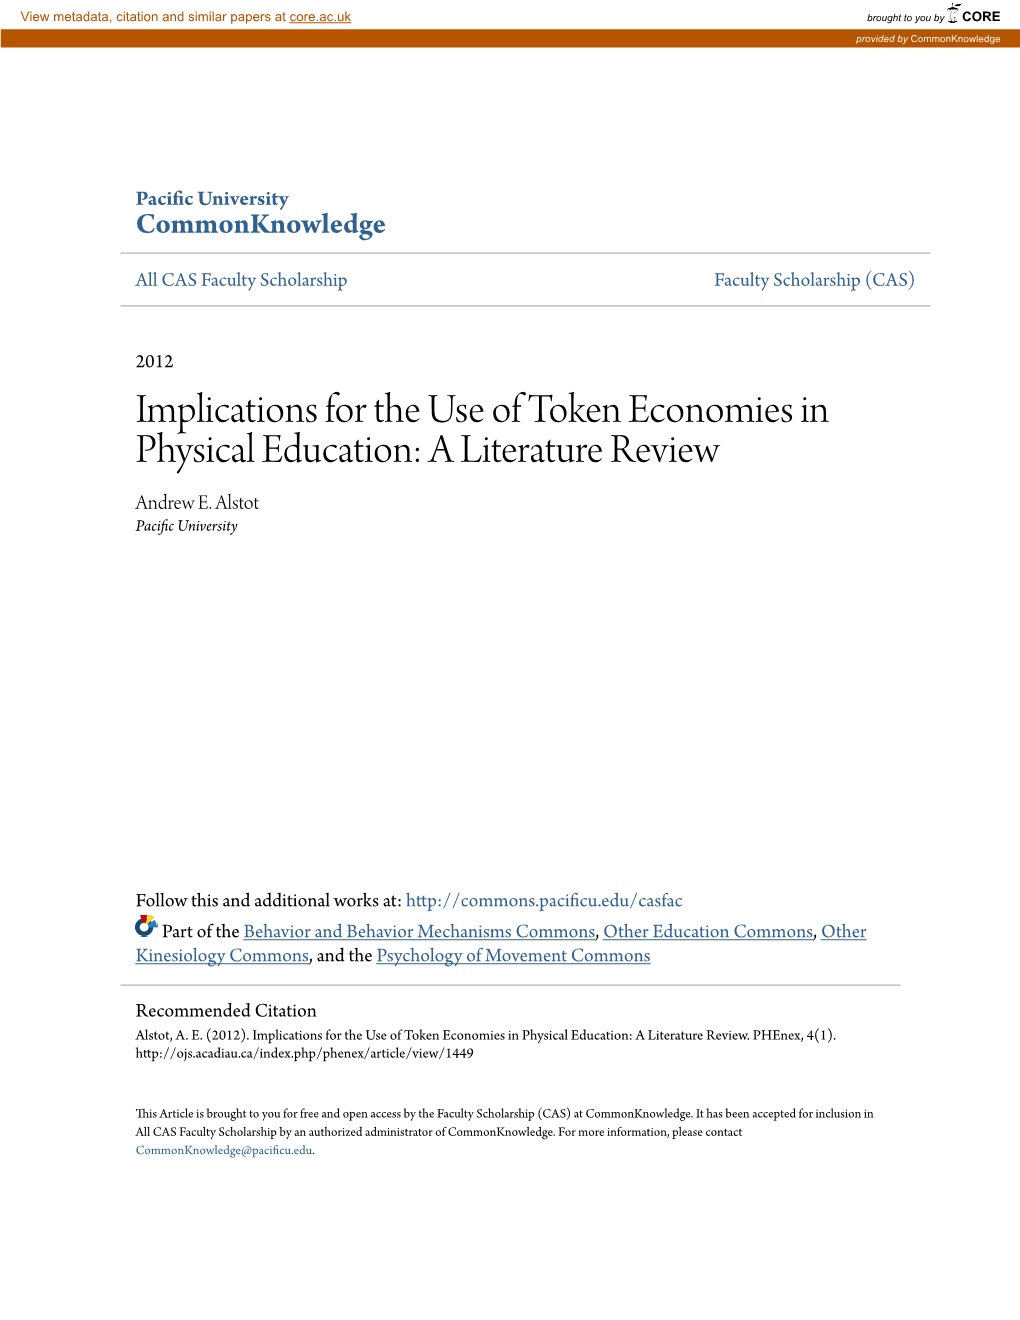 Implications for the Use of Token Economies in Physical Education: a Literature Review Andrew E